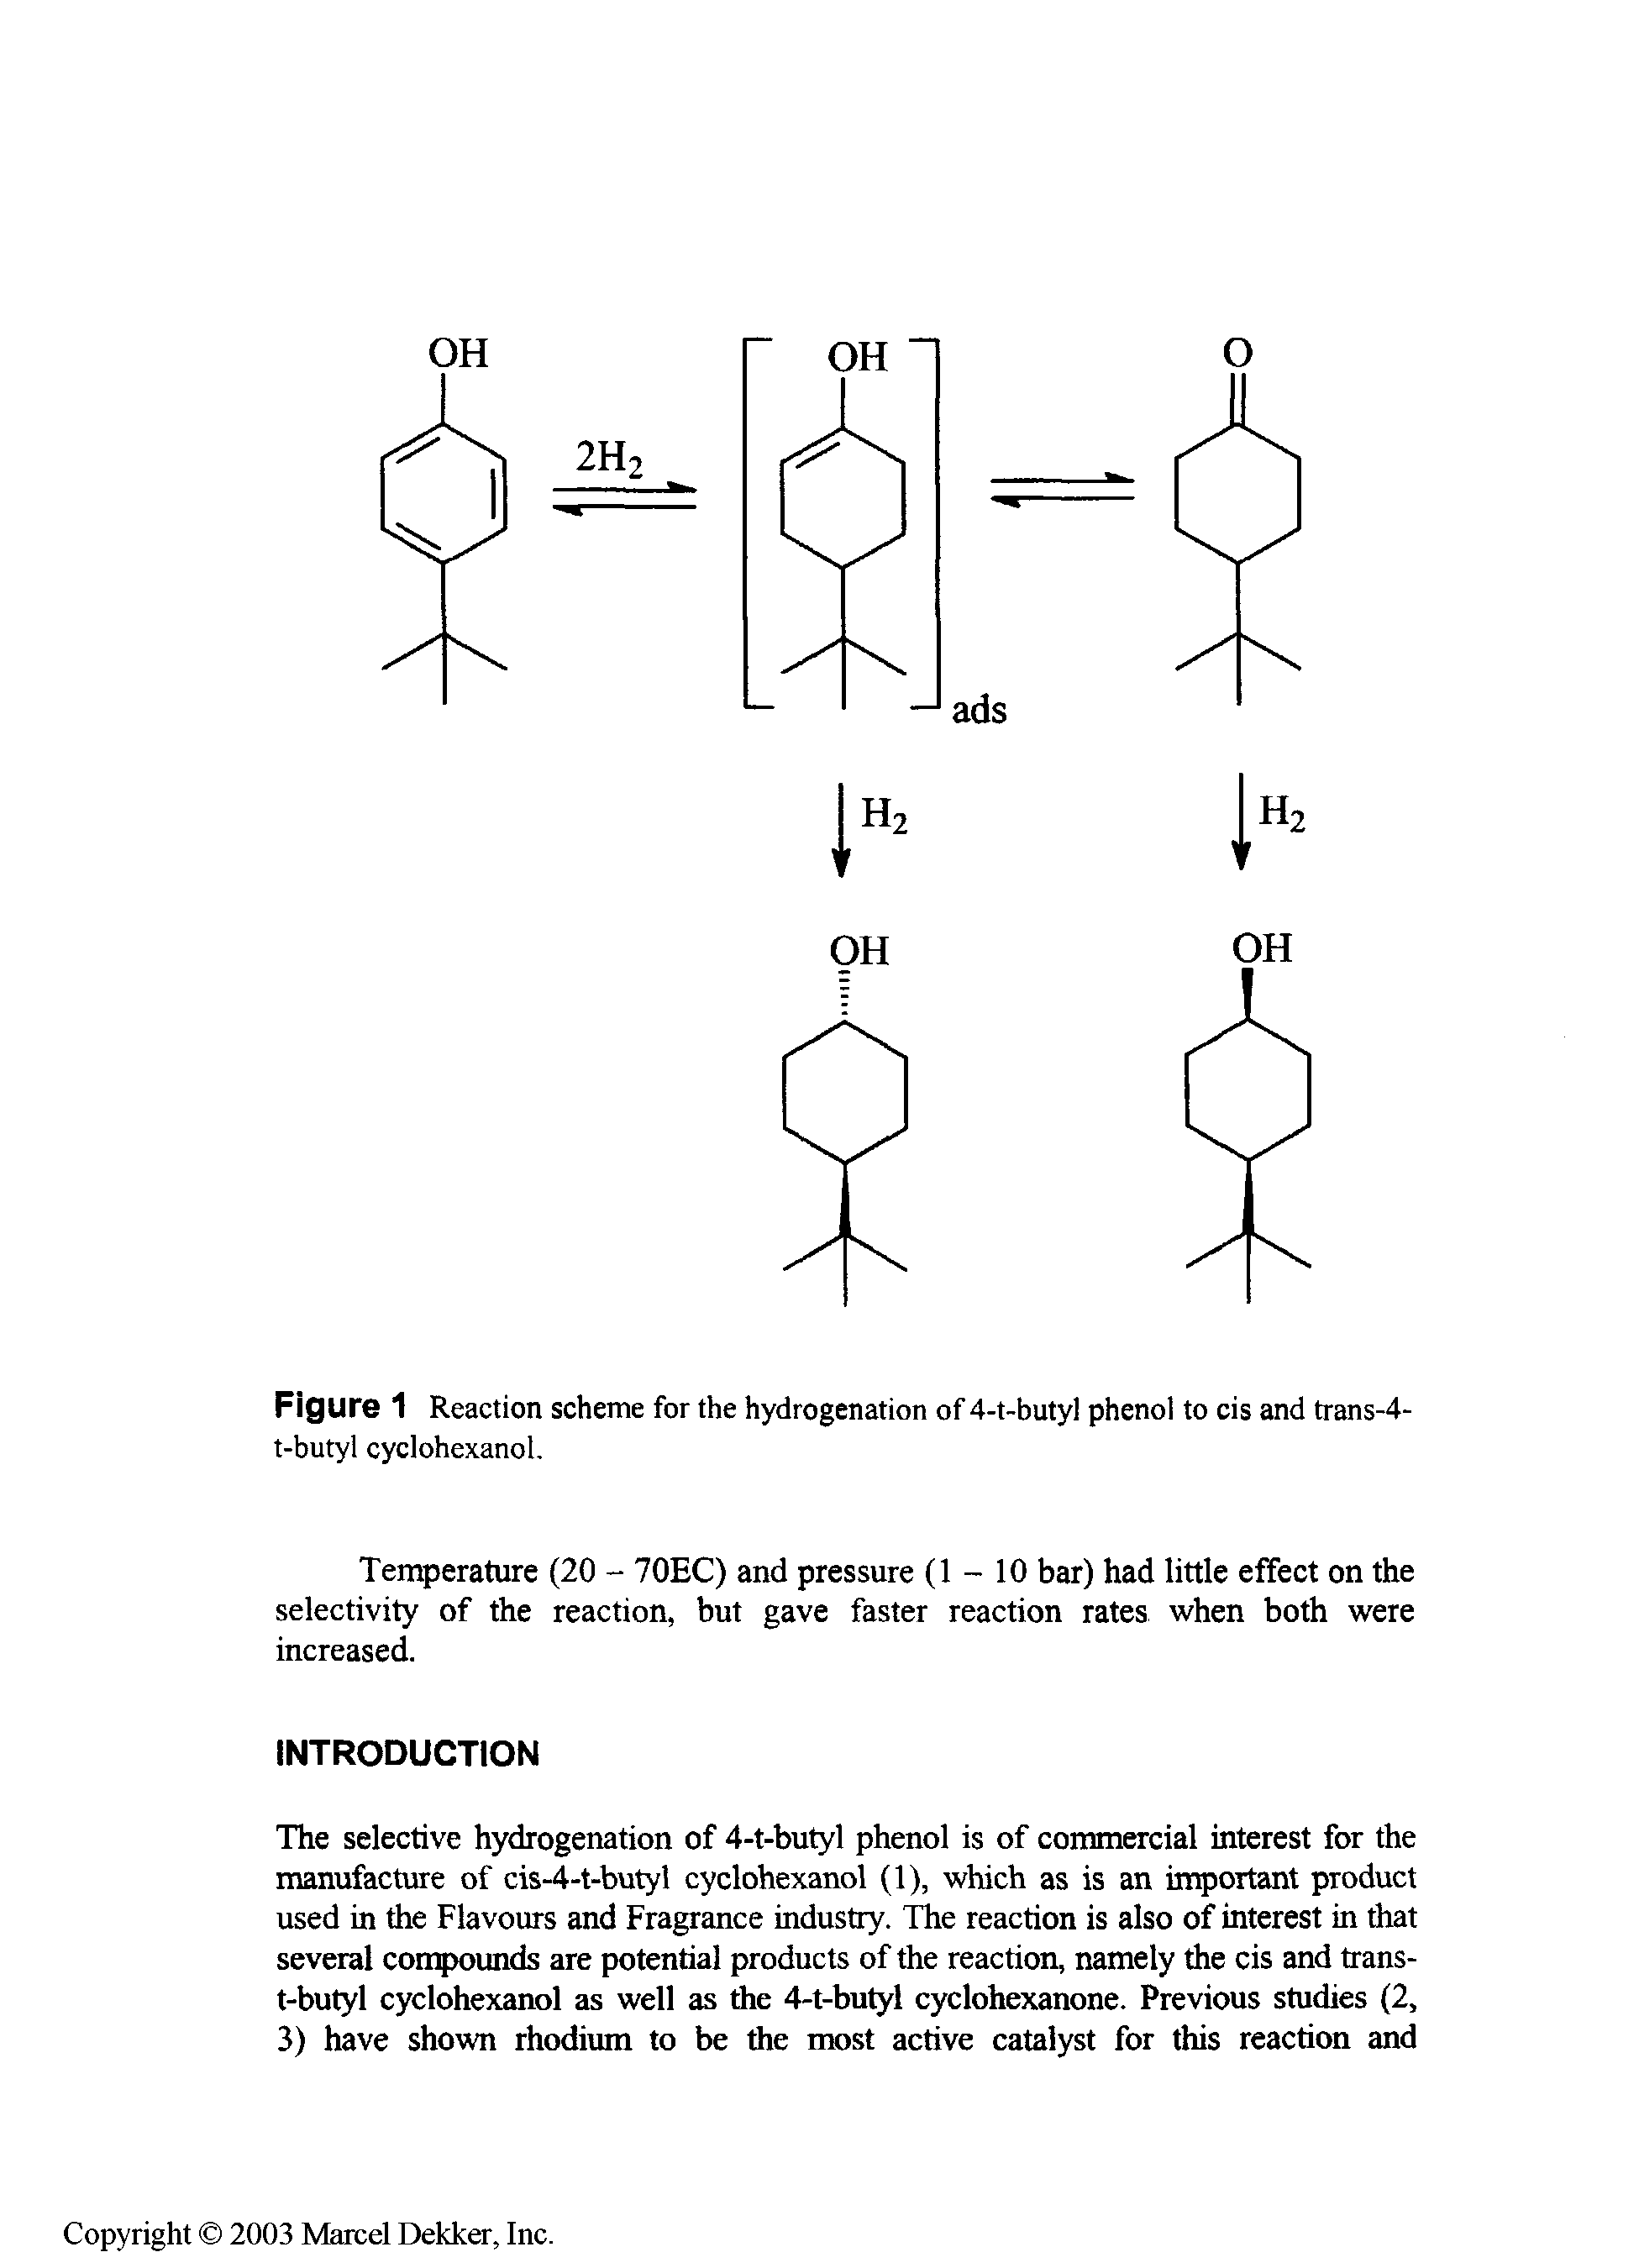 Figure 1 Reaction scheme for the hydrogenation of 4-t-butyl phenol to cis and trans-4-t-butyl cyclohexanol.